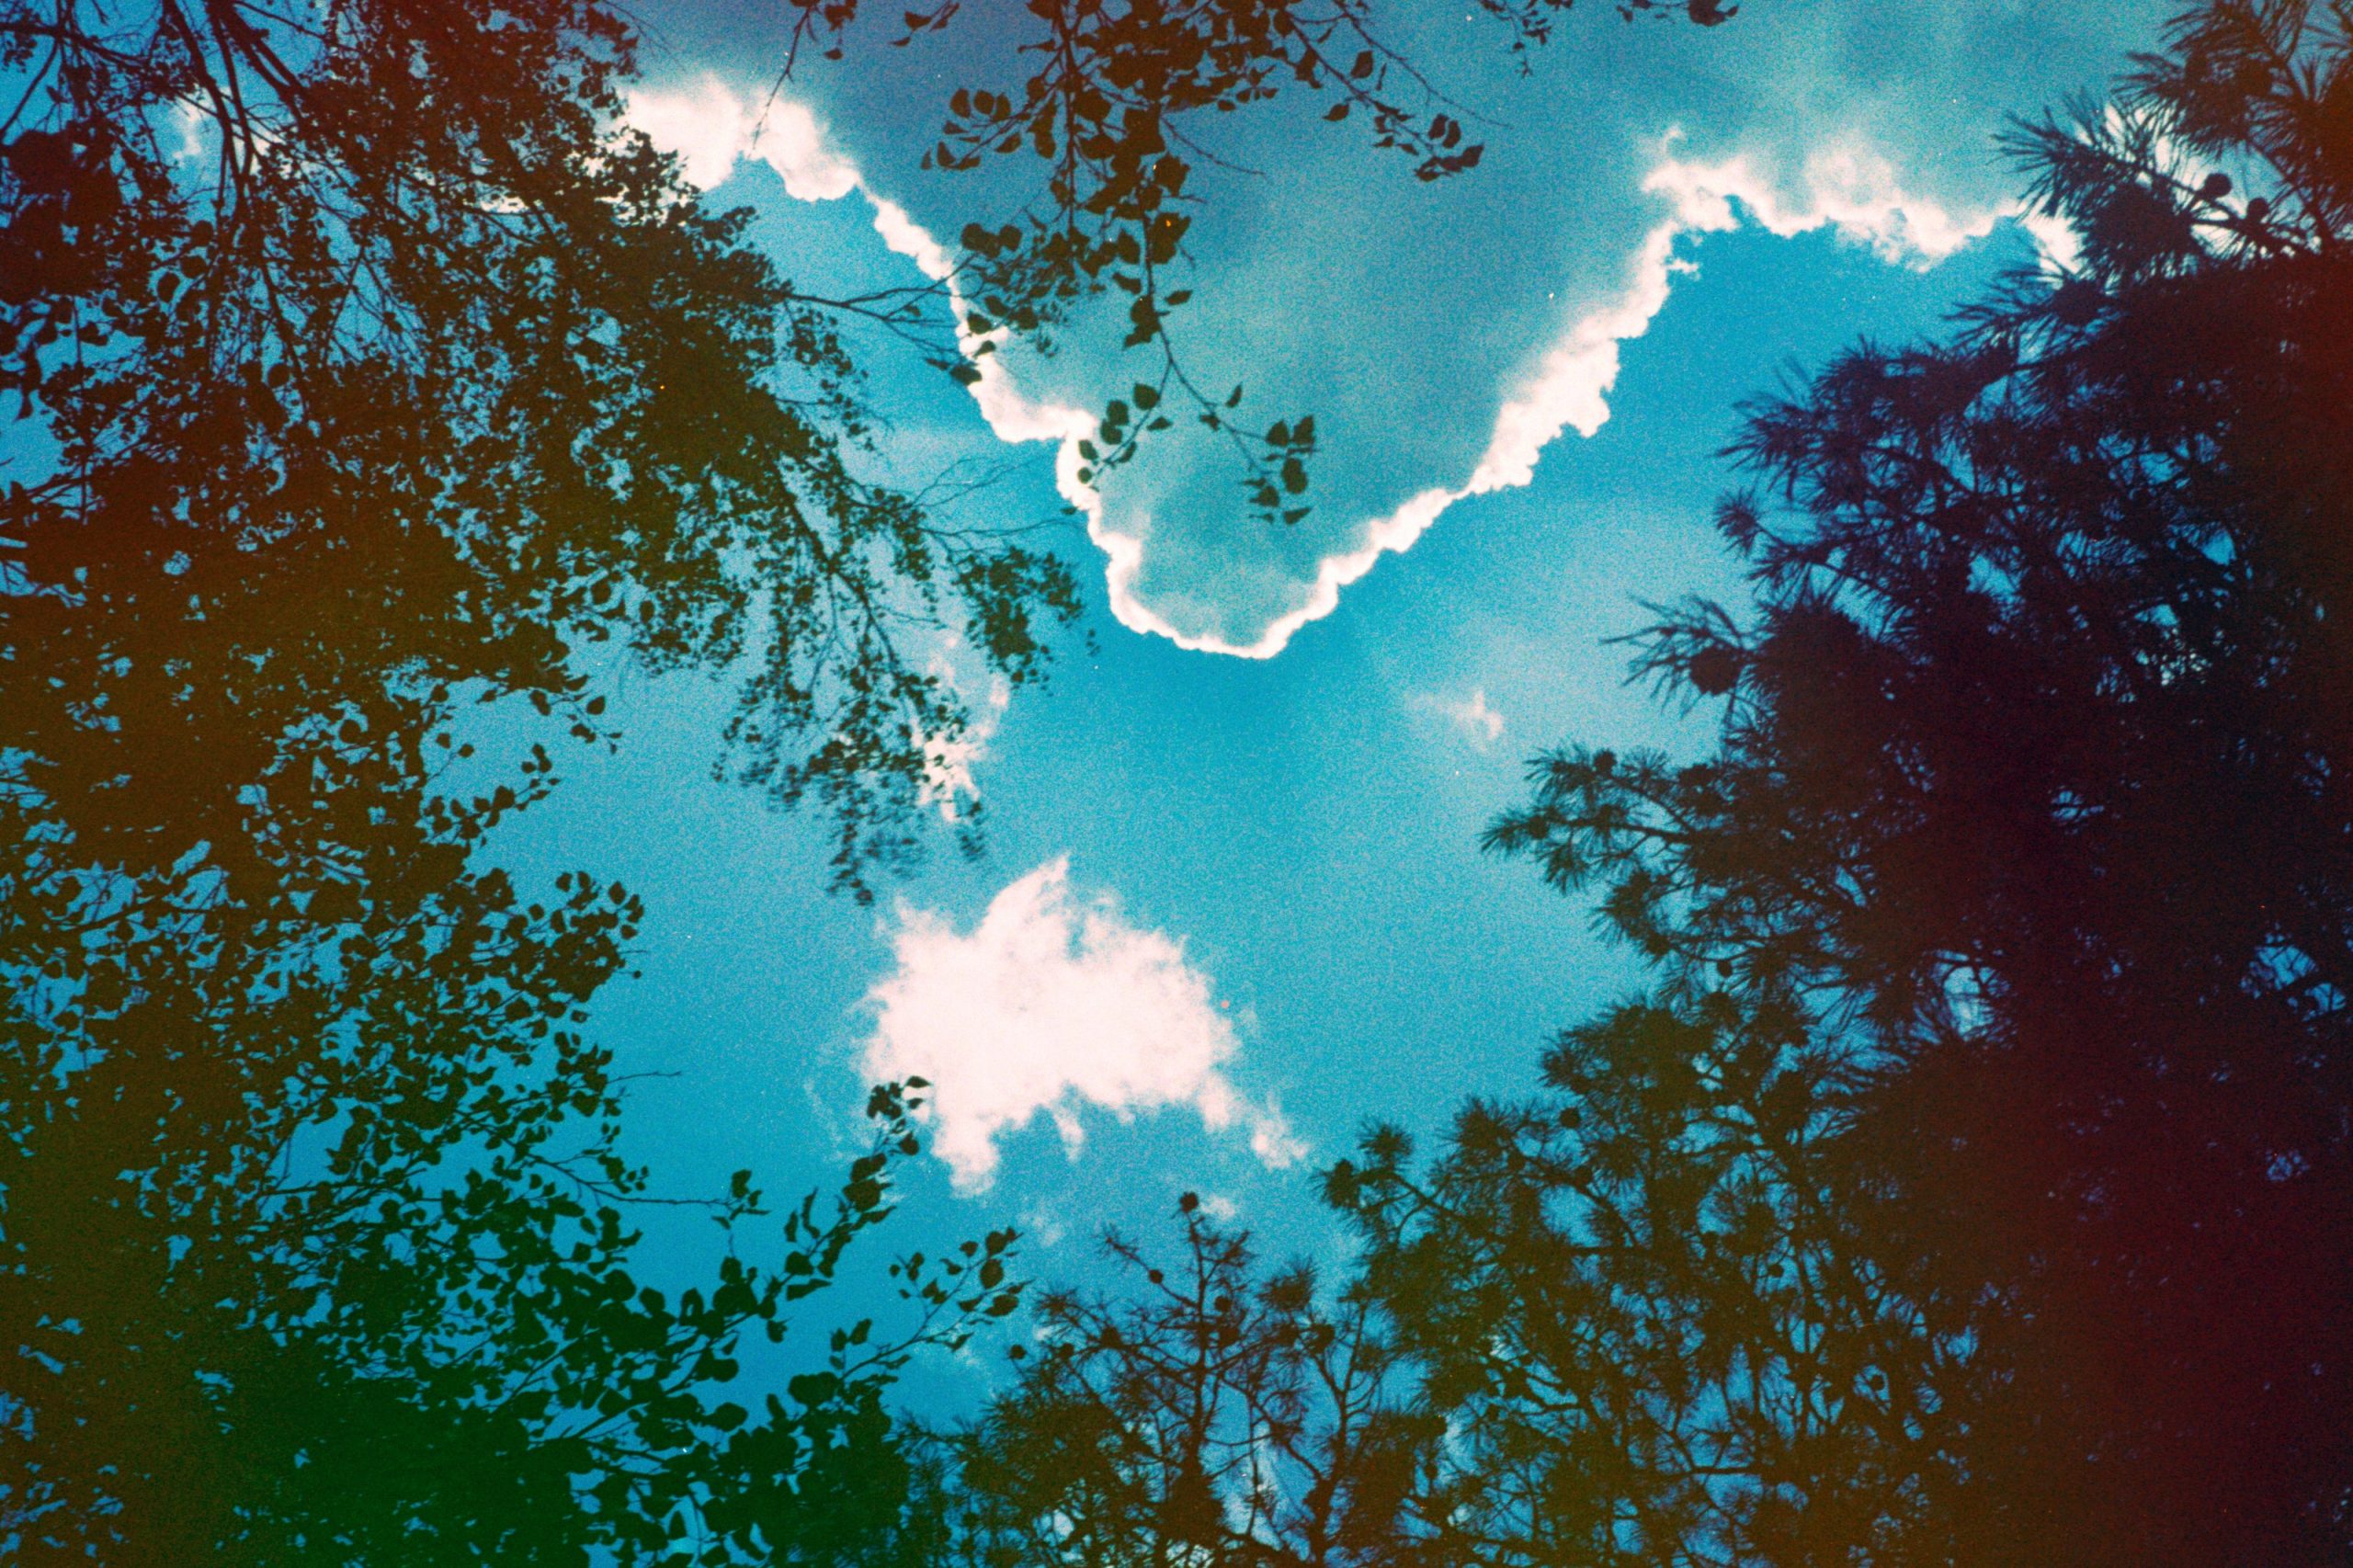 A photoshopped image of the sky with surrounding trees in the shot.